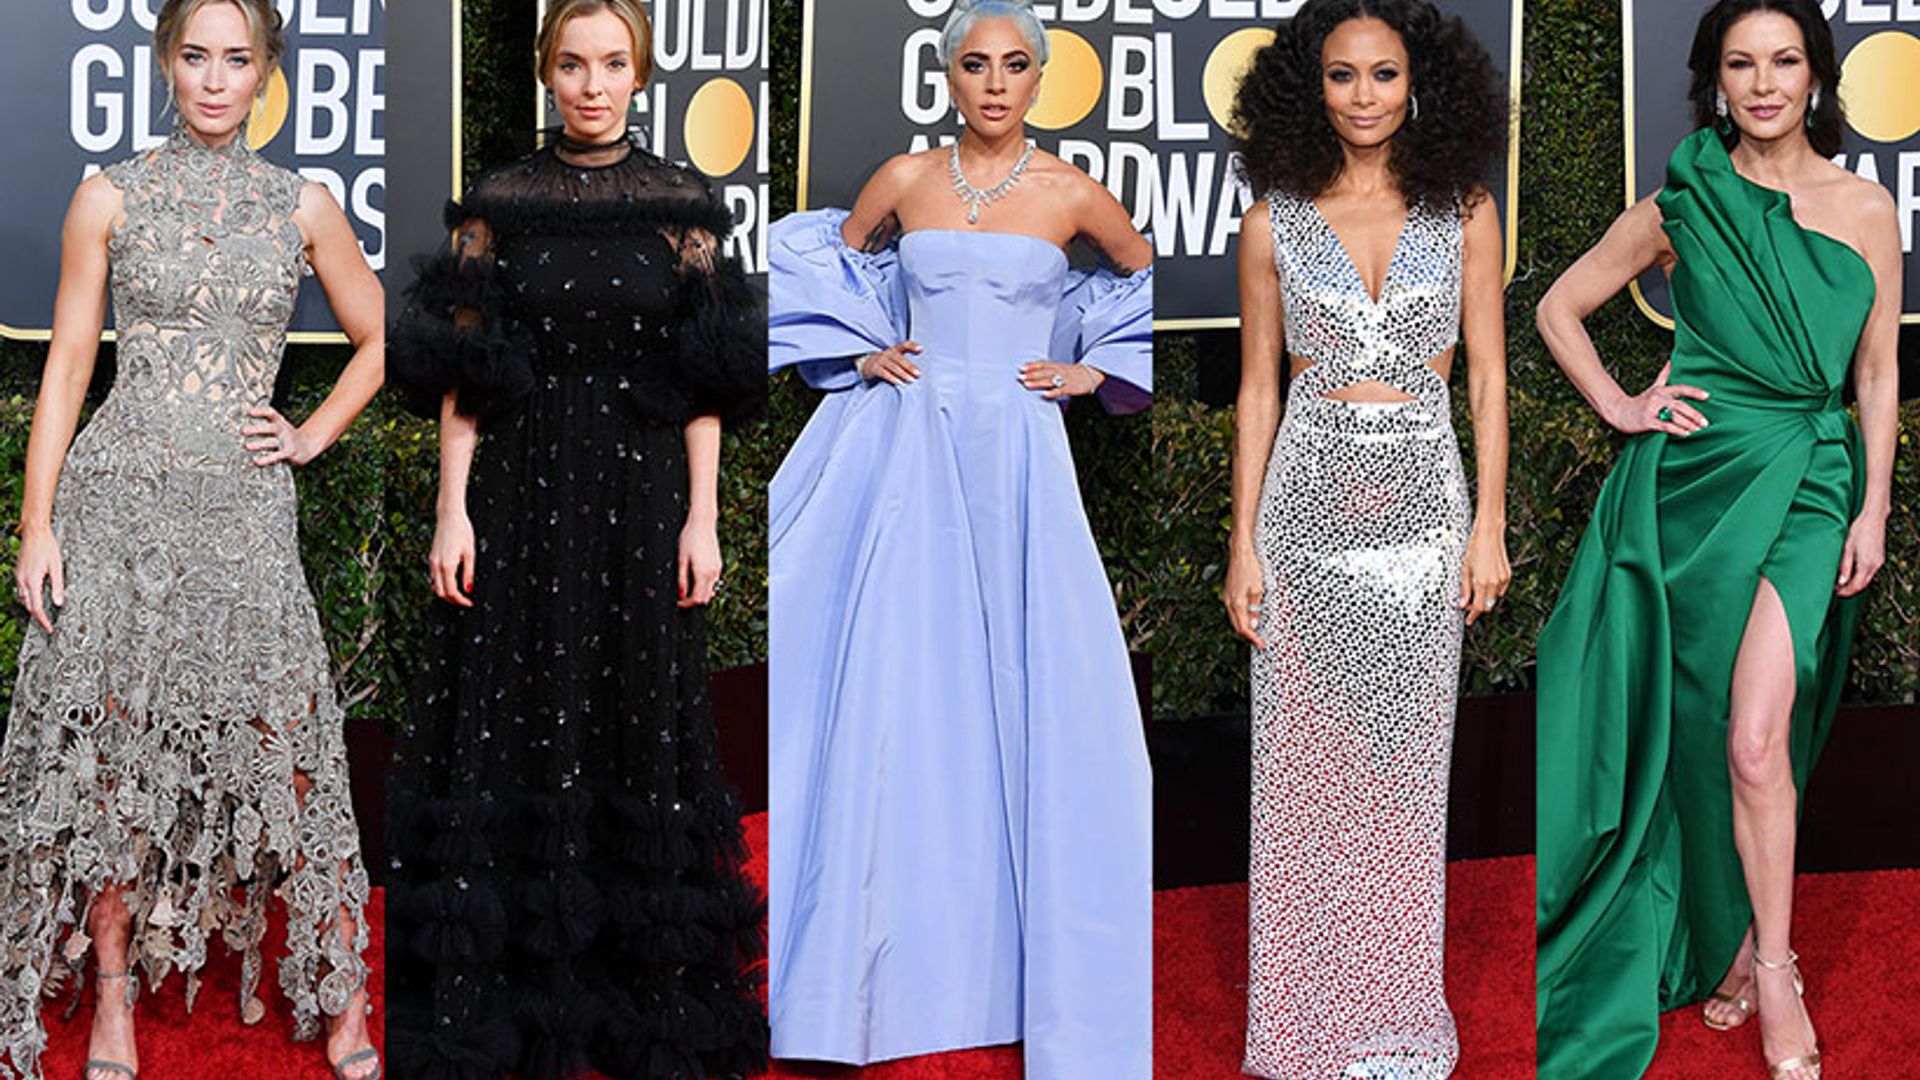 Golden Globes 2019: The dresses everyone’s talking about